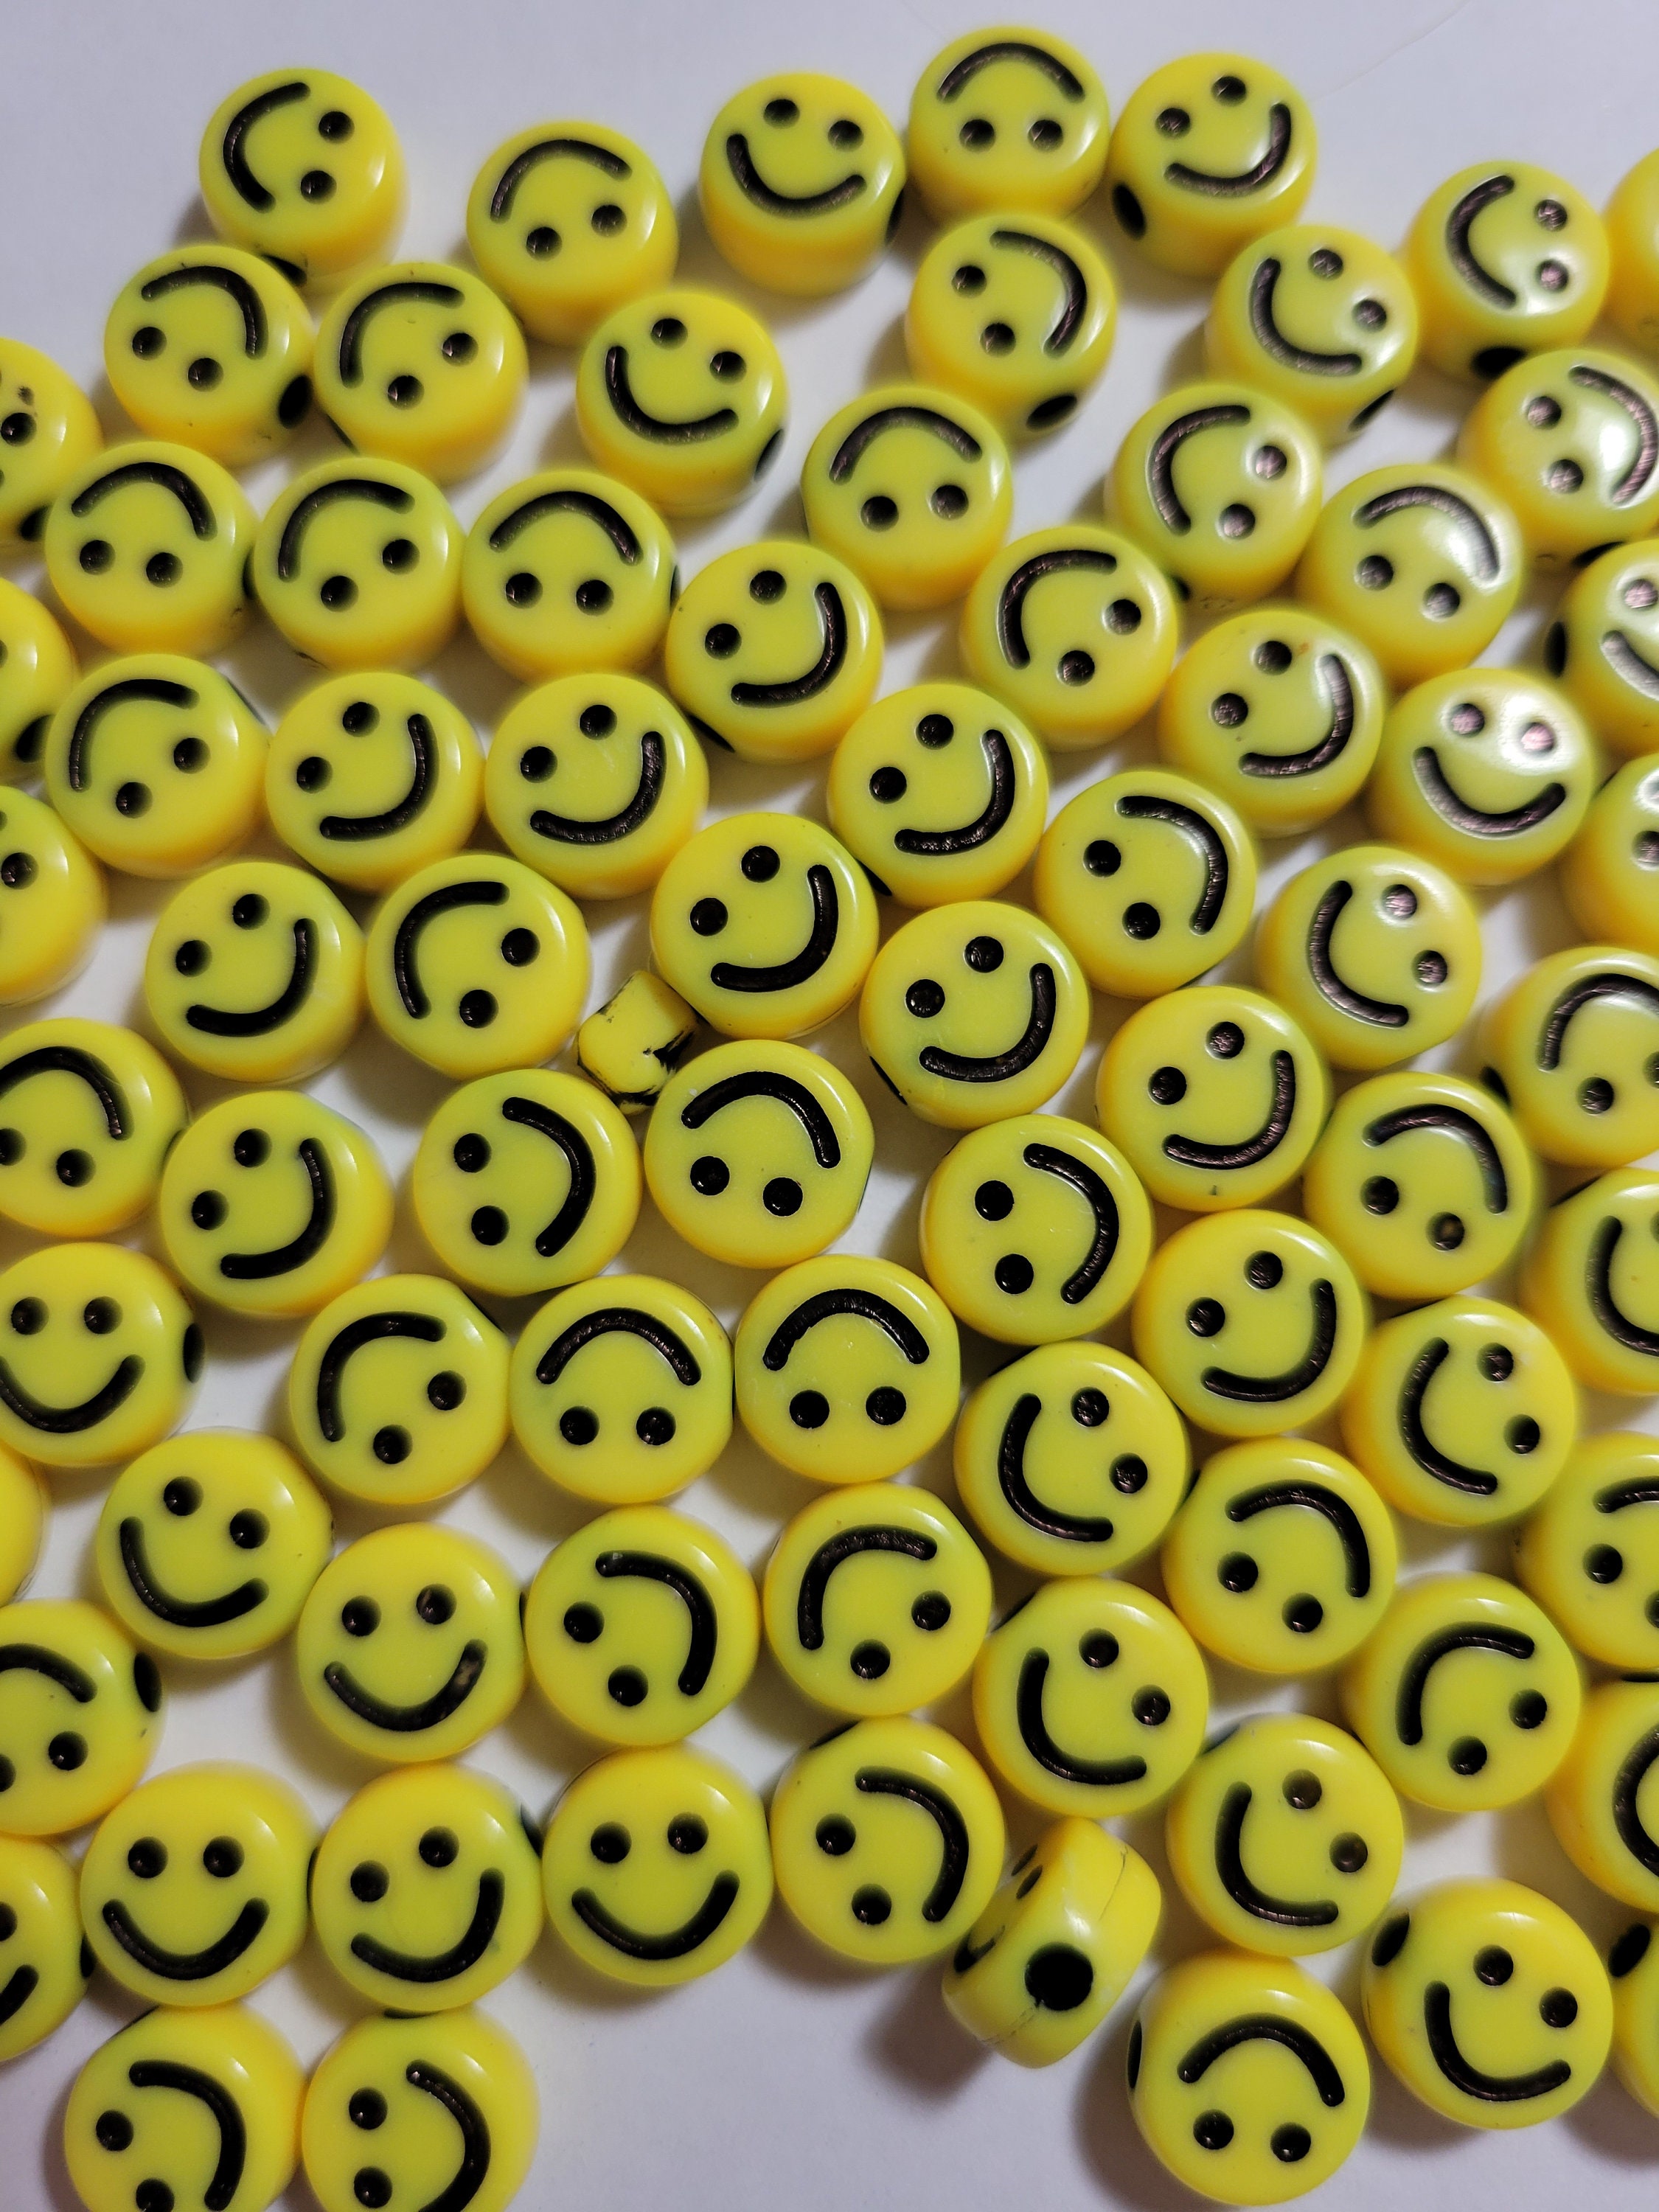 8MM/10MM Yellow Round Smiley Face Beads